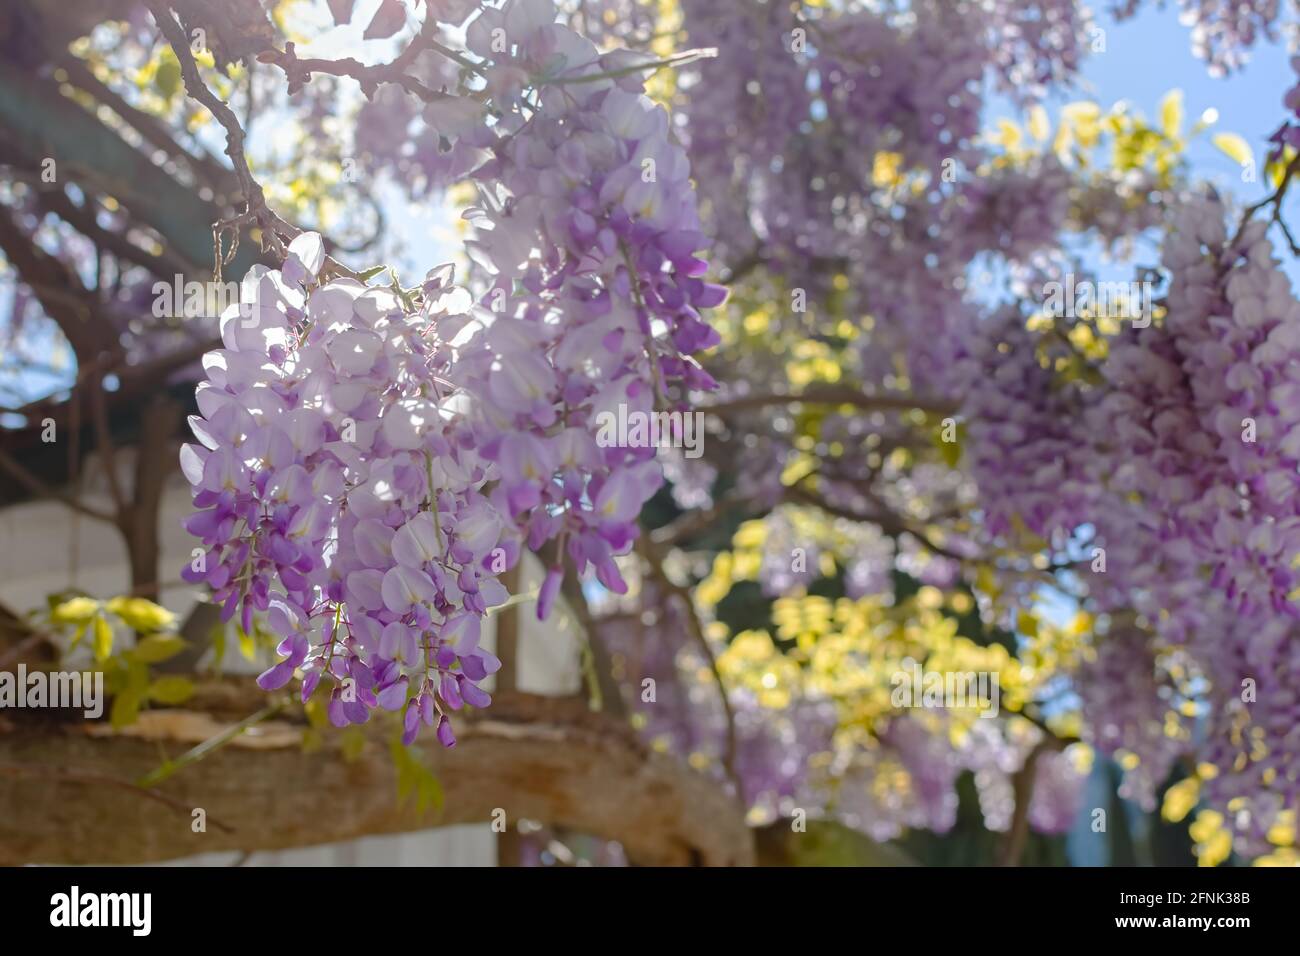 Purple wisteria close-up blooms in the spring garden. Delicate purple flowers in the bright sunlight. Beautiful atmospheric spring background. Blurry Stock Photo